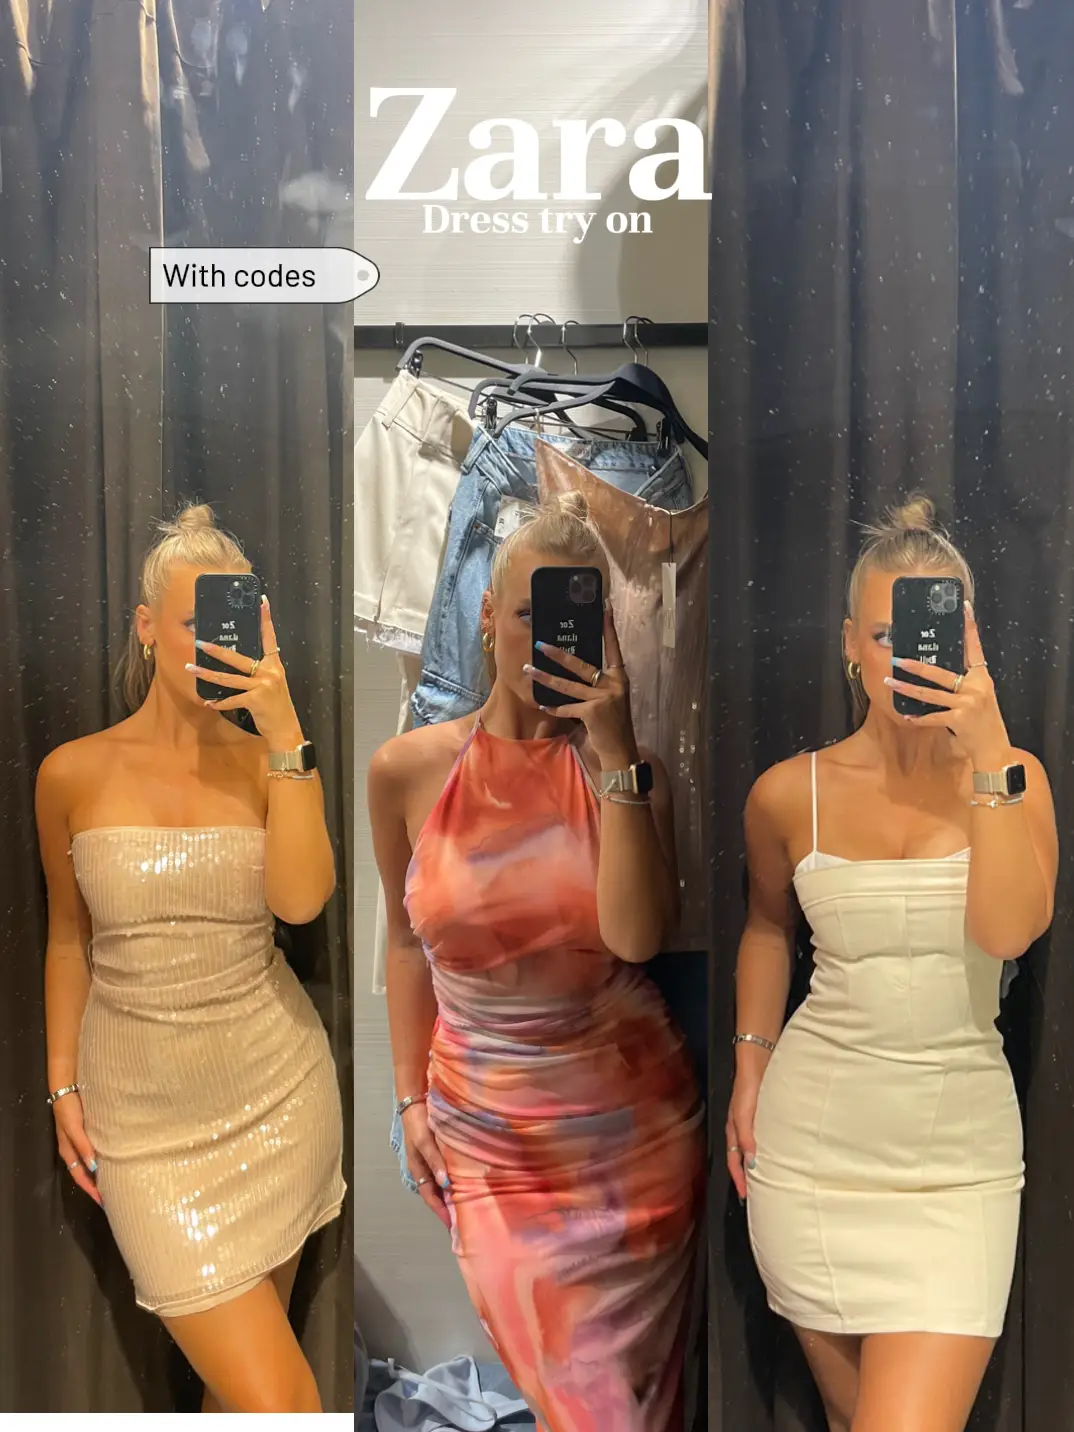 Zara summer 2023 dress try on, Gallery posted by zoeilanahill